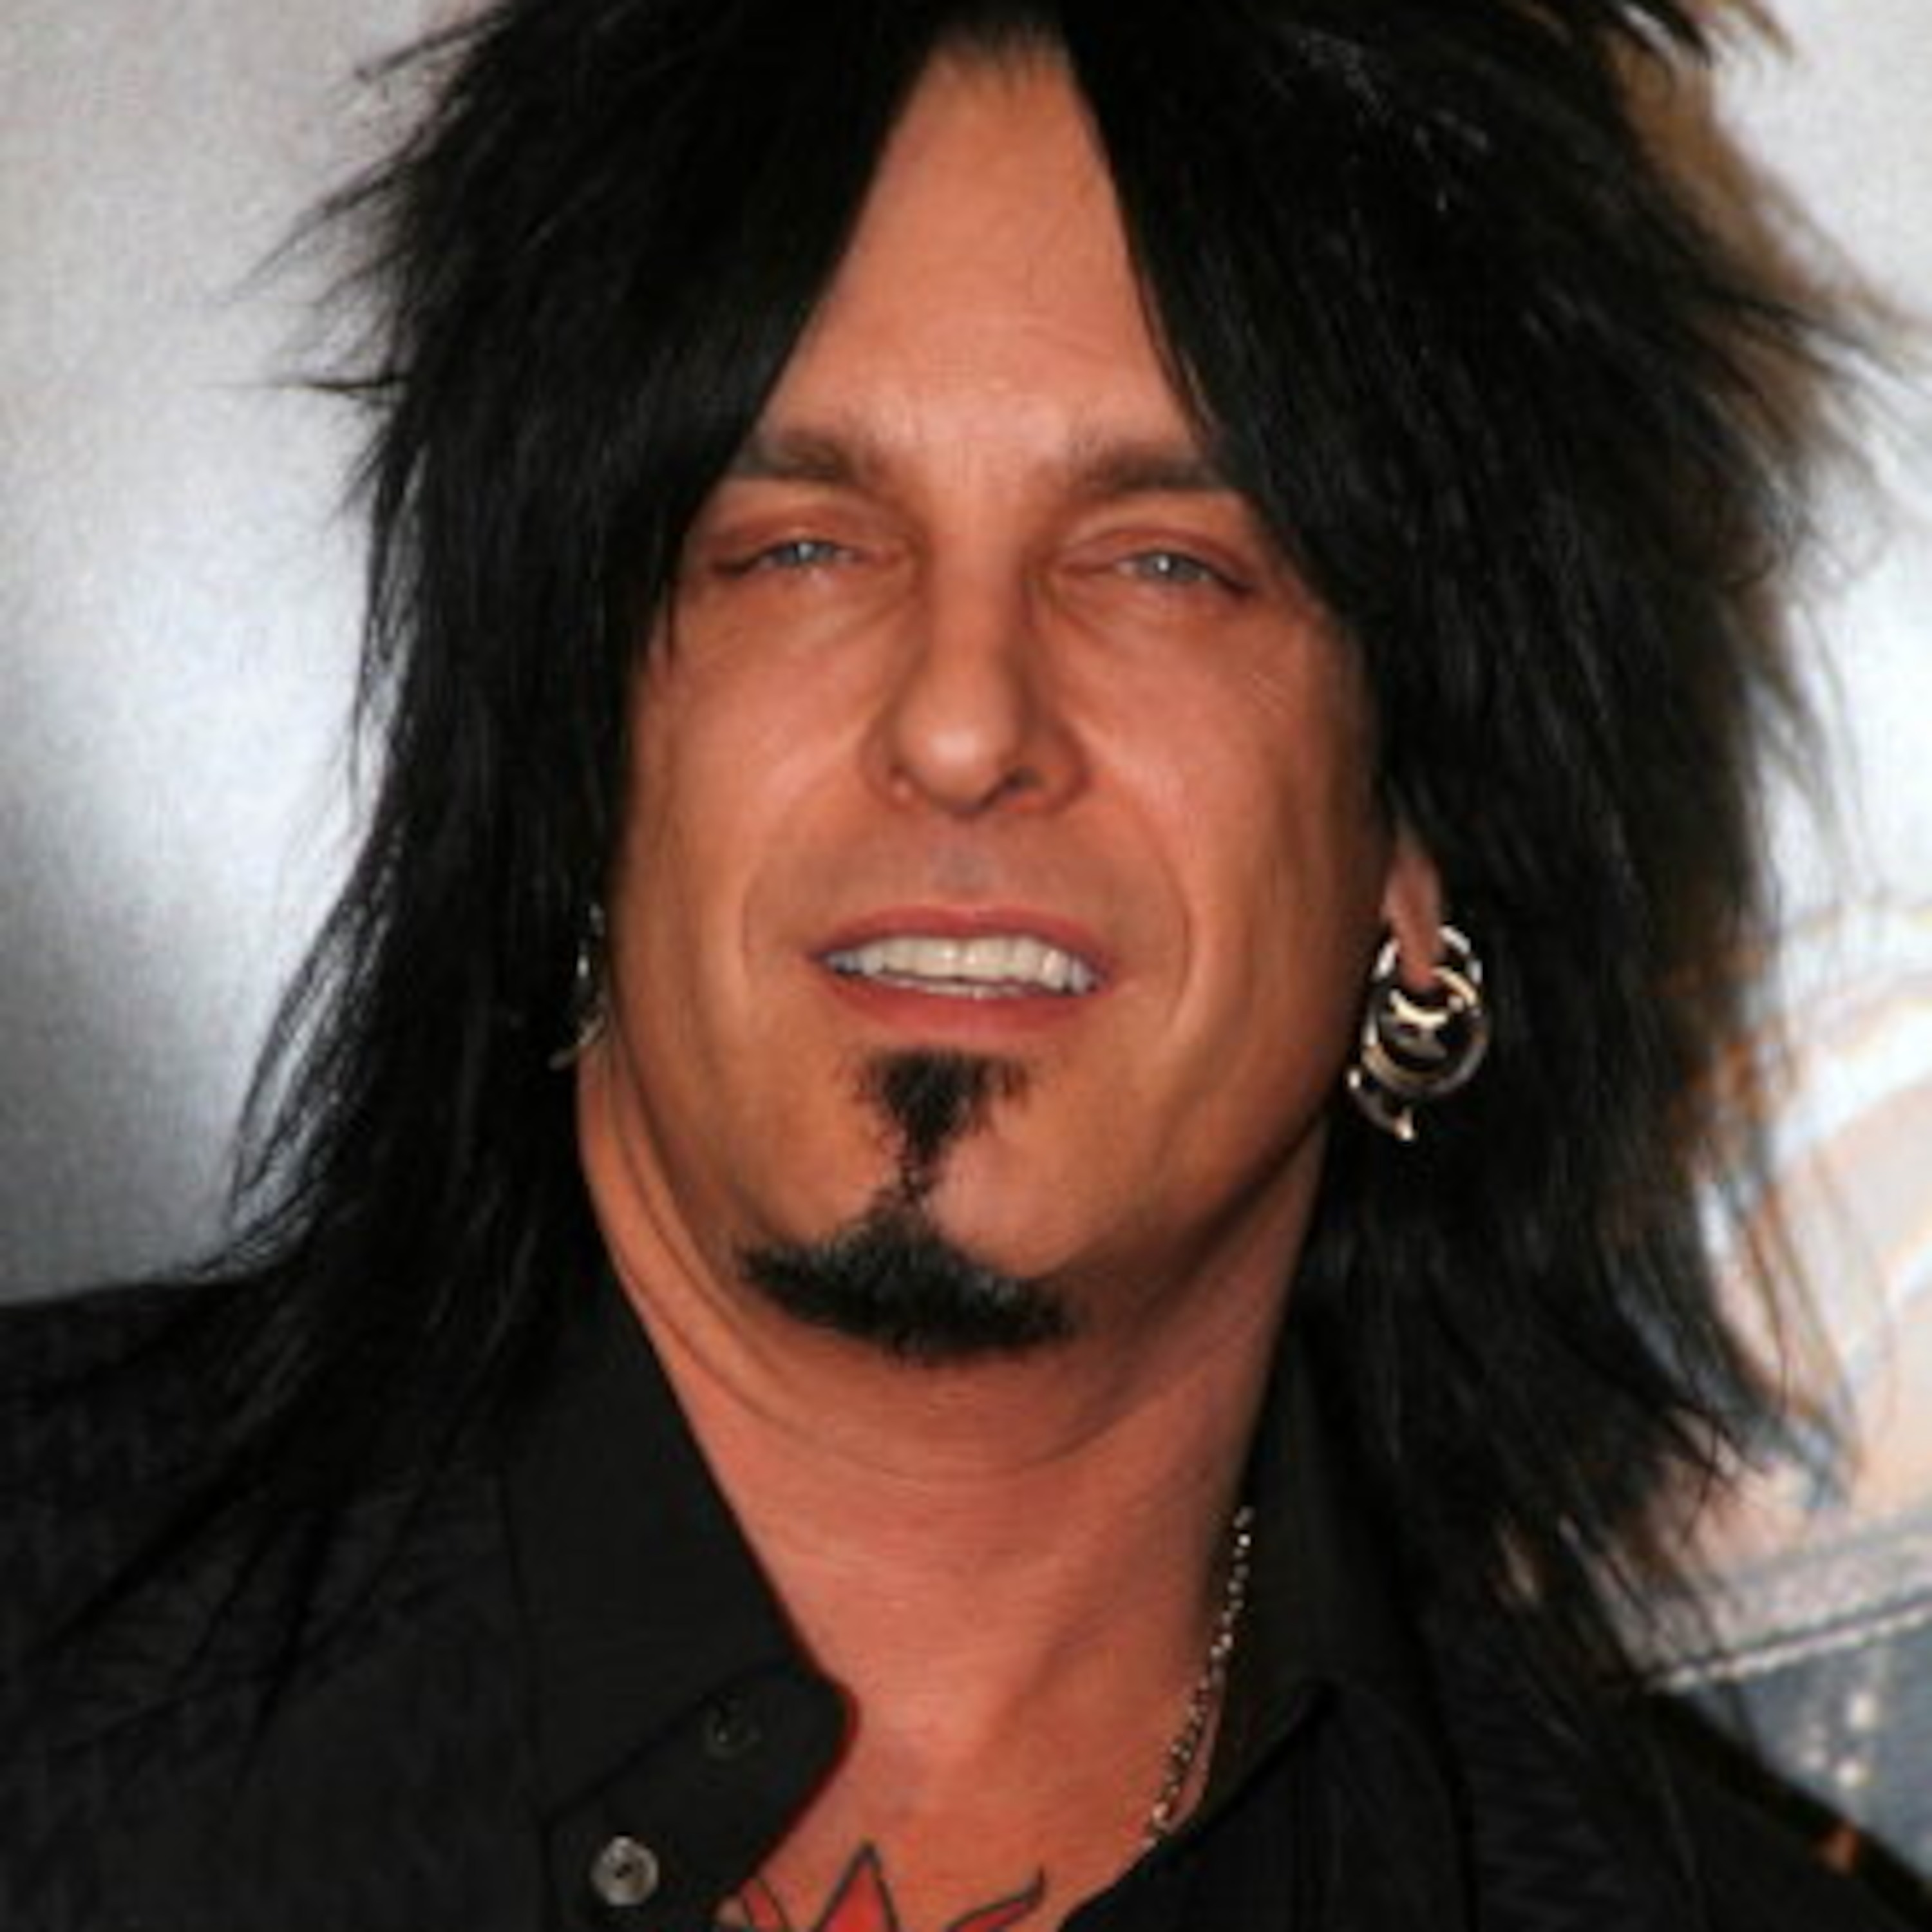 Nikki Sixx on Recovery Radio Live with Host Ricky Leigh and friends discuss...